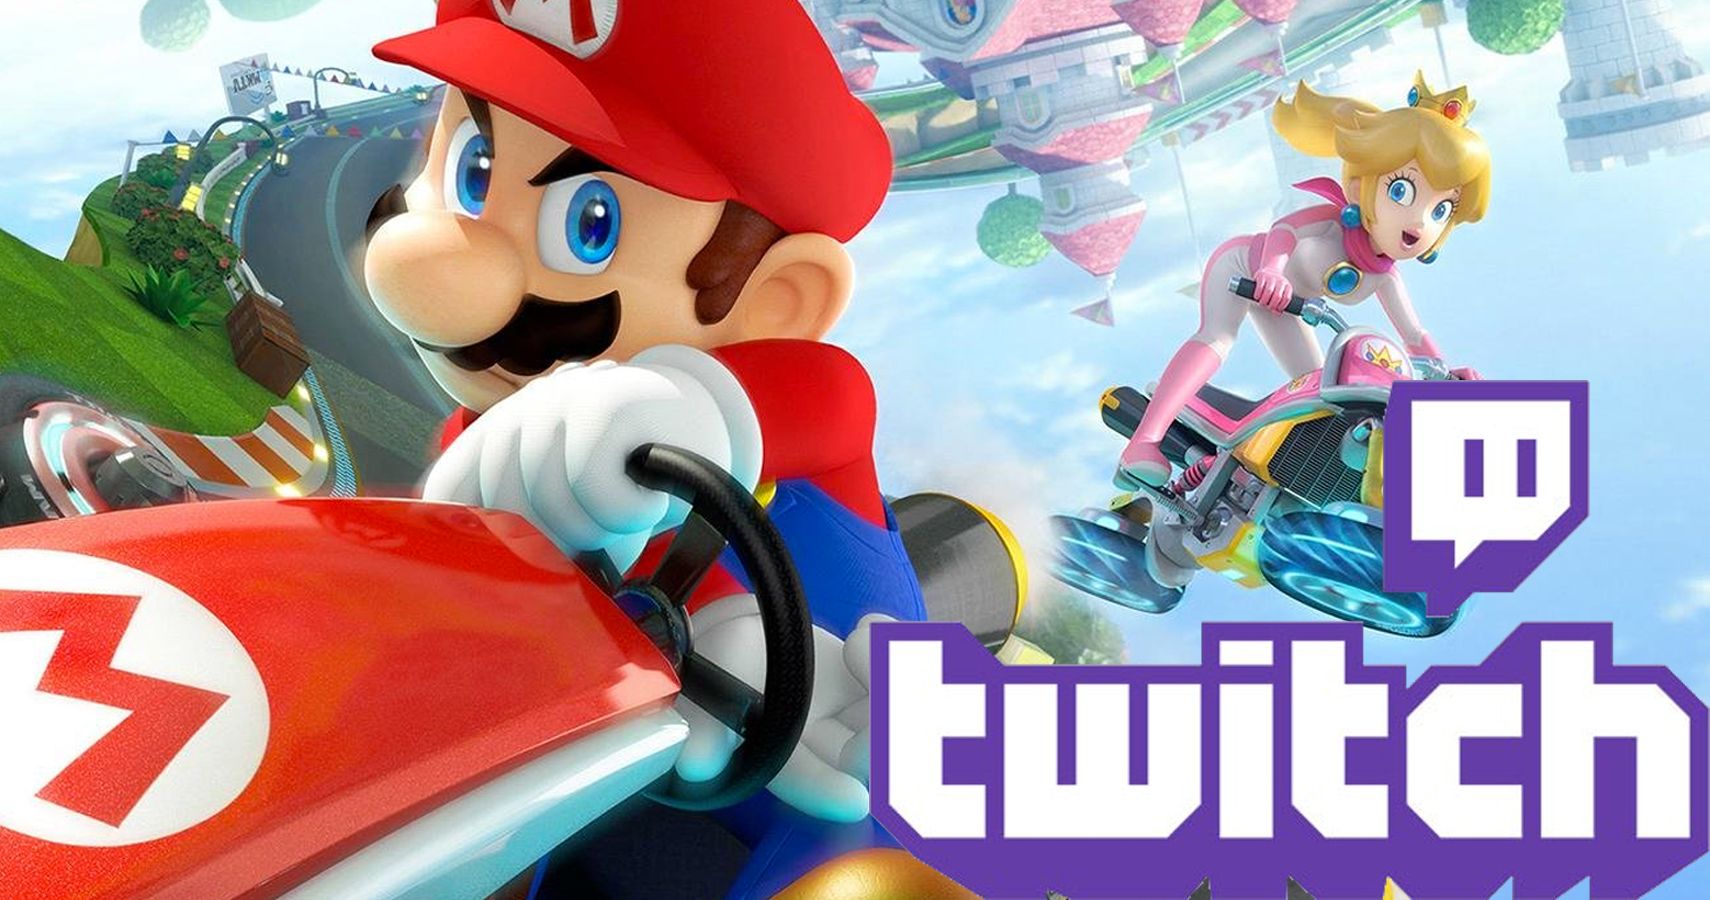 Twitch Tries To Play Nice With EU Officials By Inviting Them Over For Mario Kart